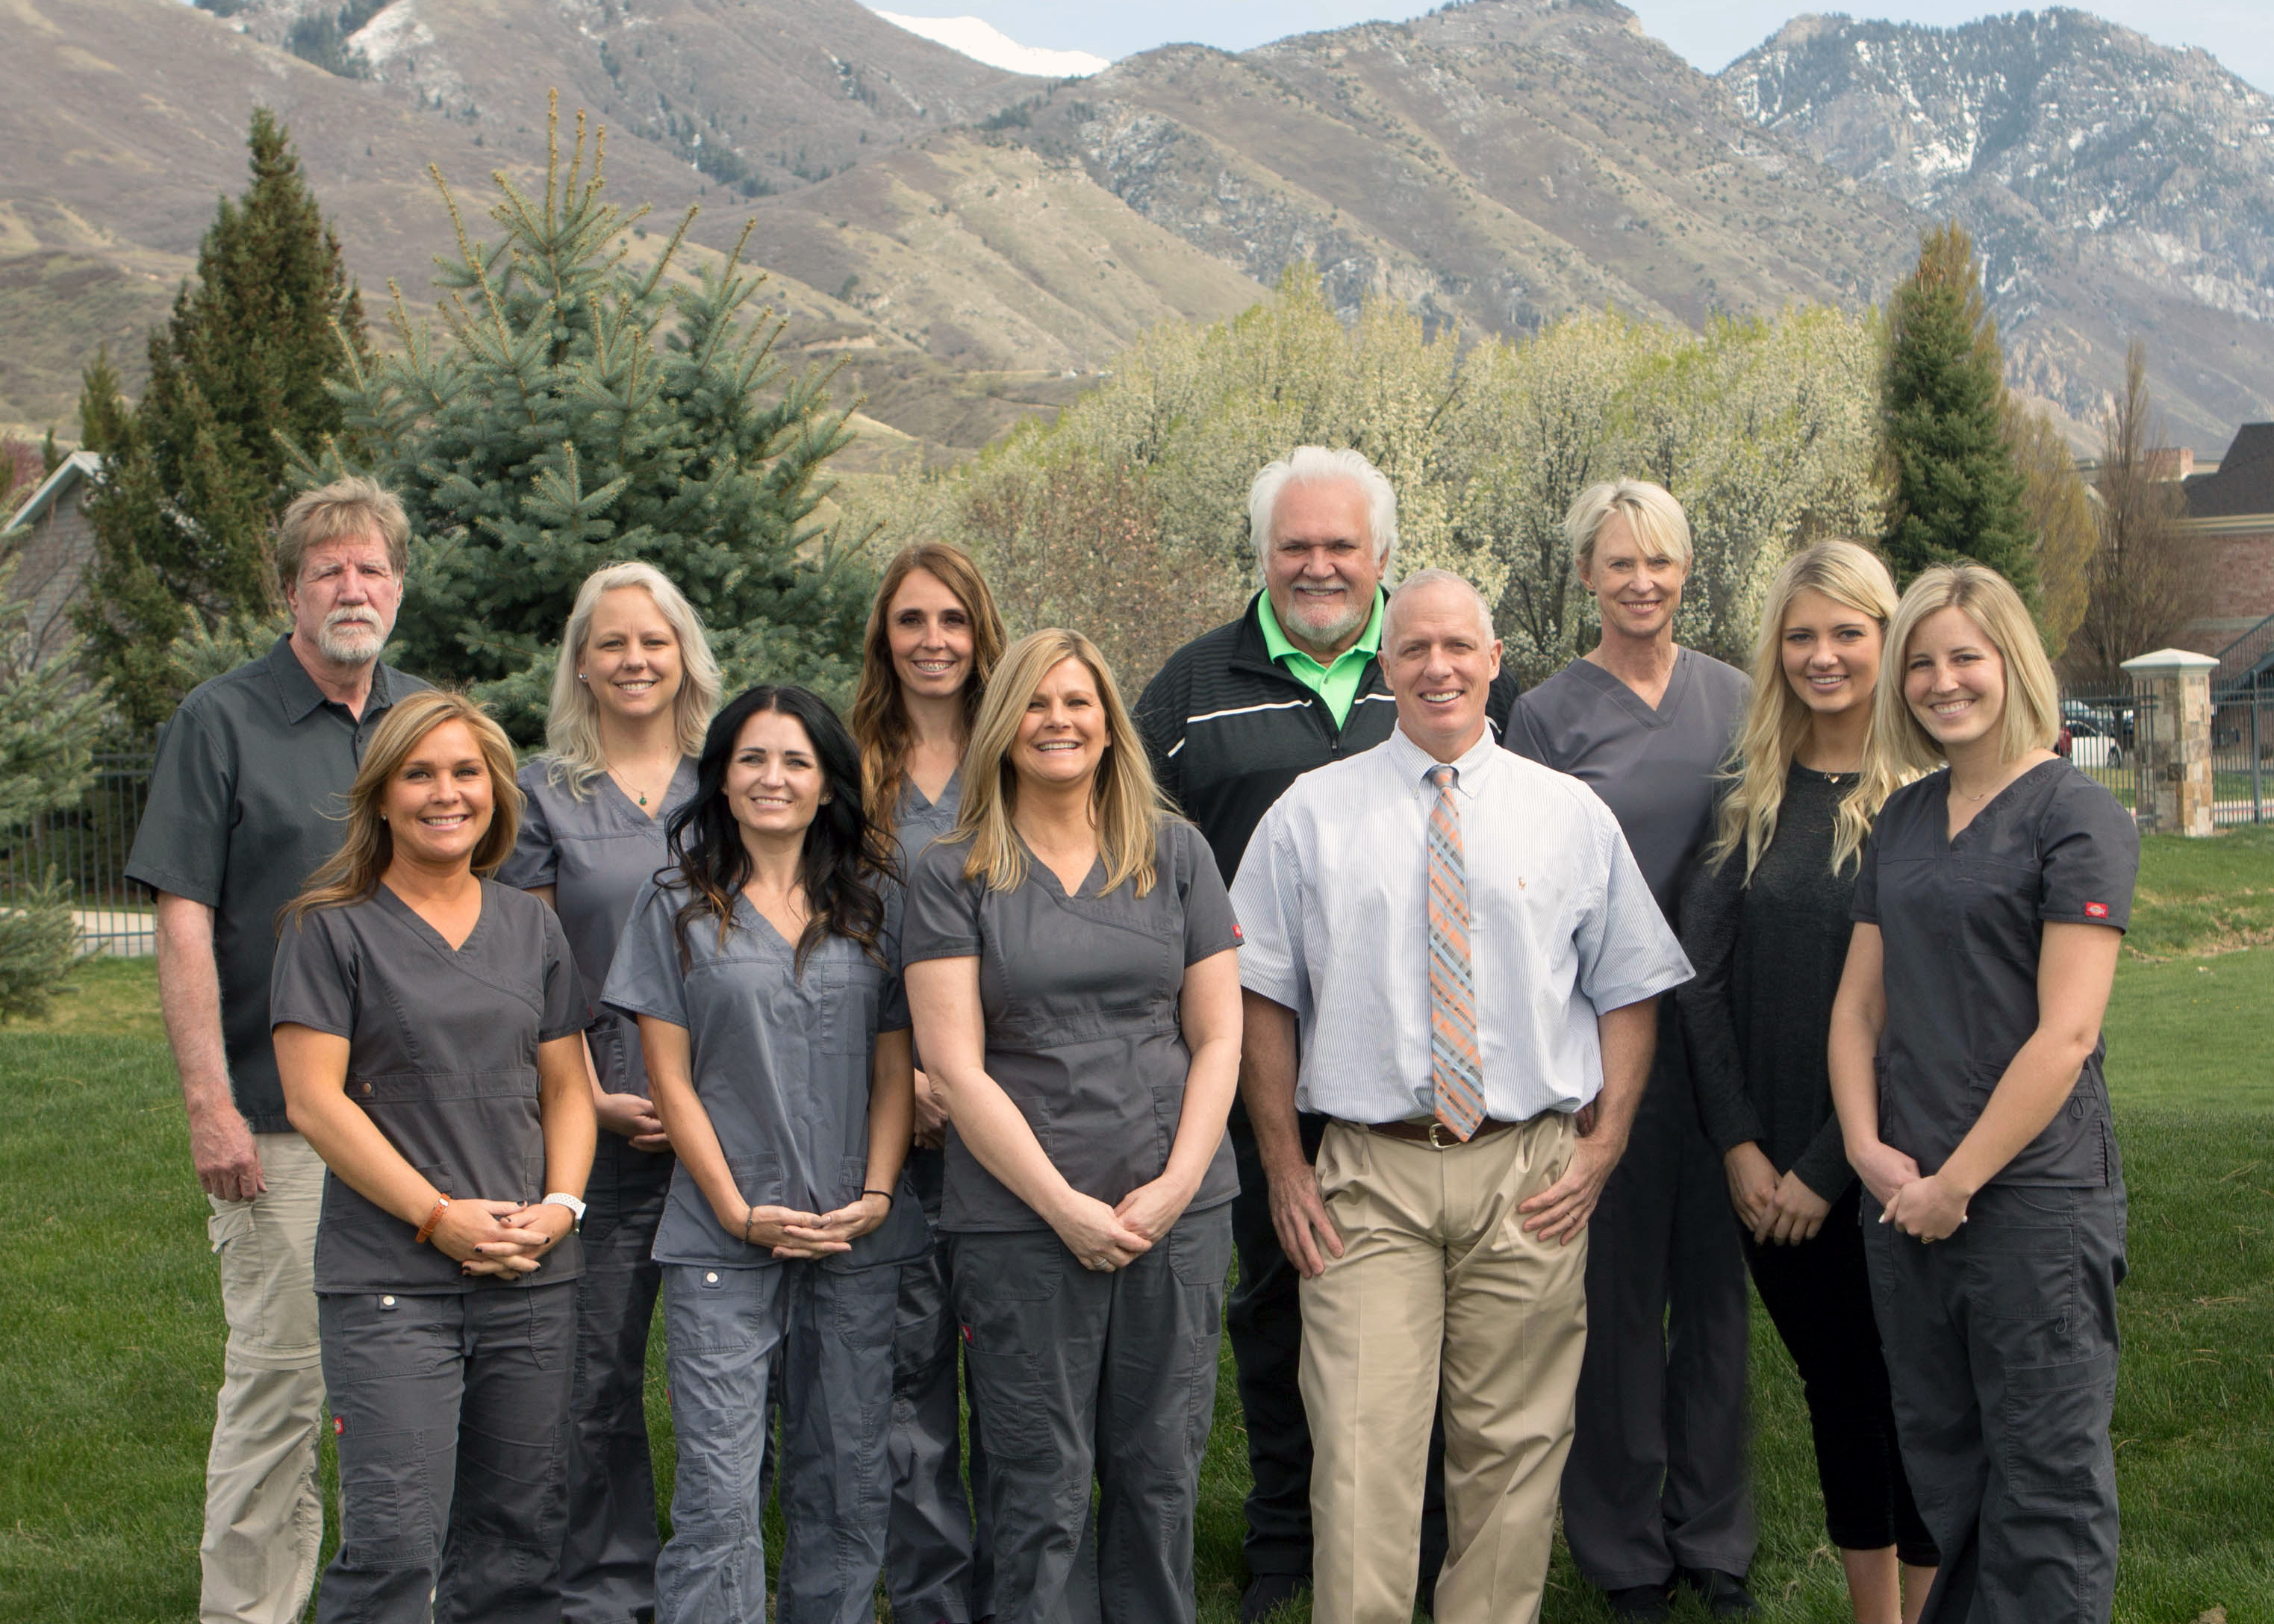 Dr. Will Christensen and his team of 11 men and women outside in Orem, Utah